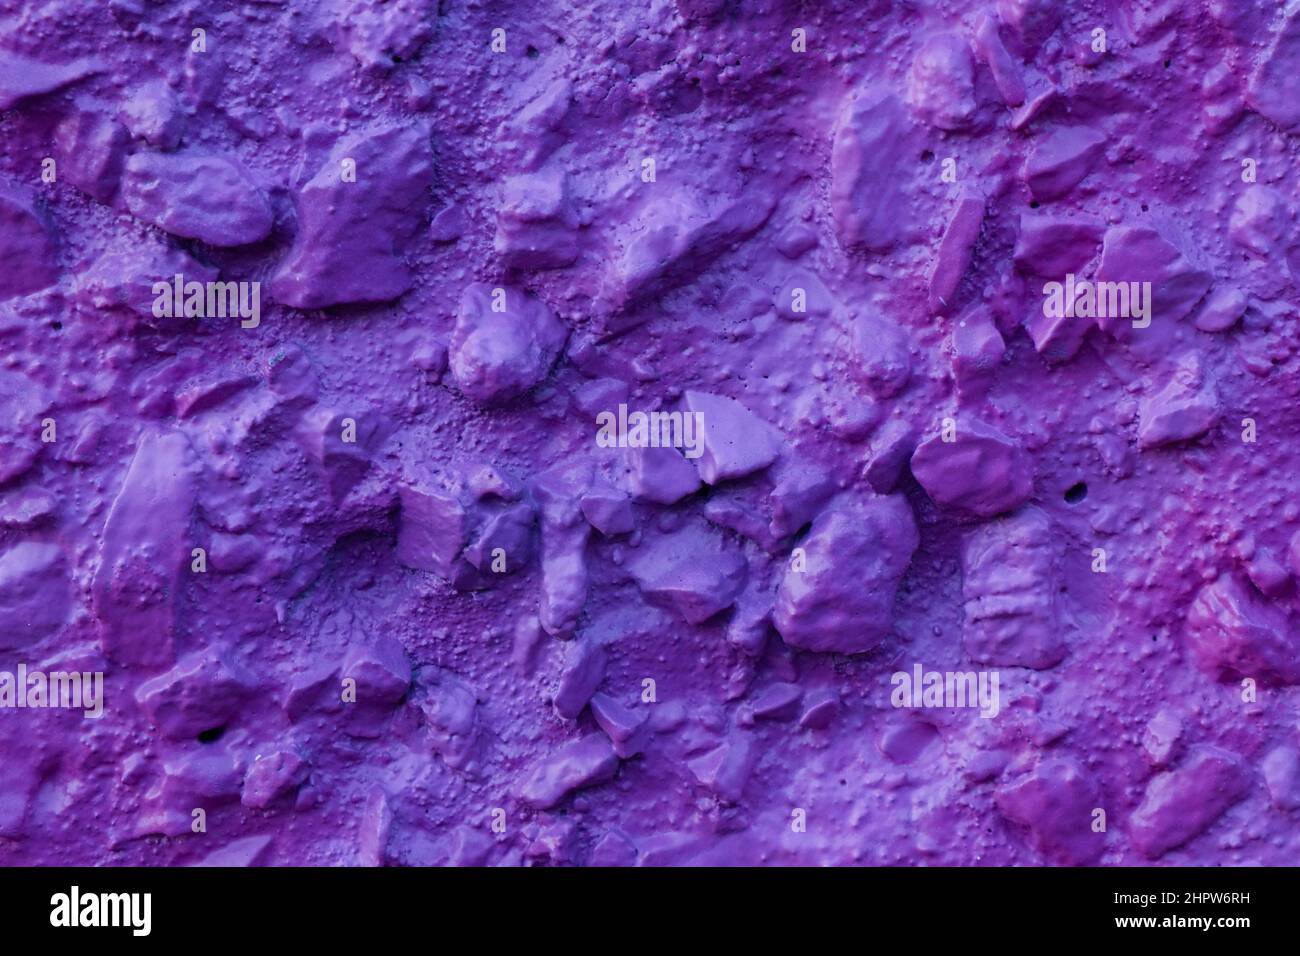 Violet painted relief wall with rough chaotic convex elements. Concrete wall covered uneven decorative stucco and painted bluish-purple paint. Stock Photo